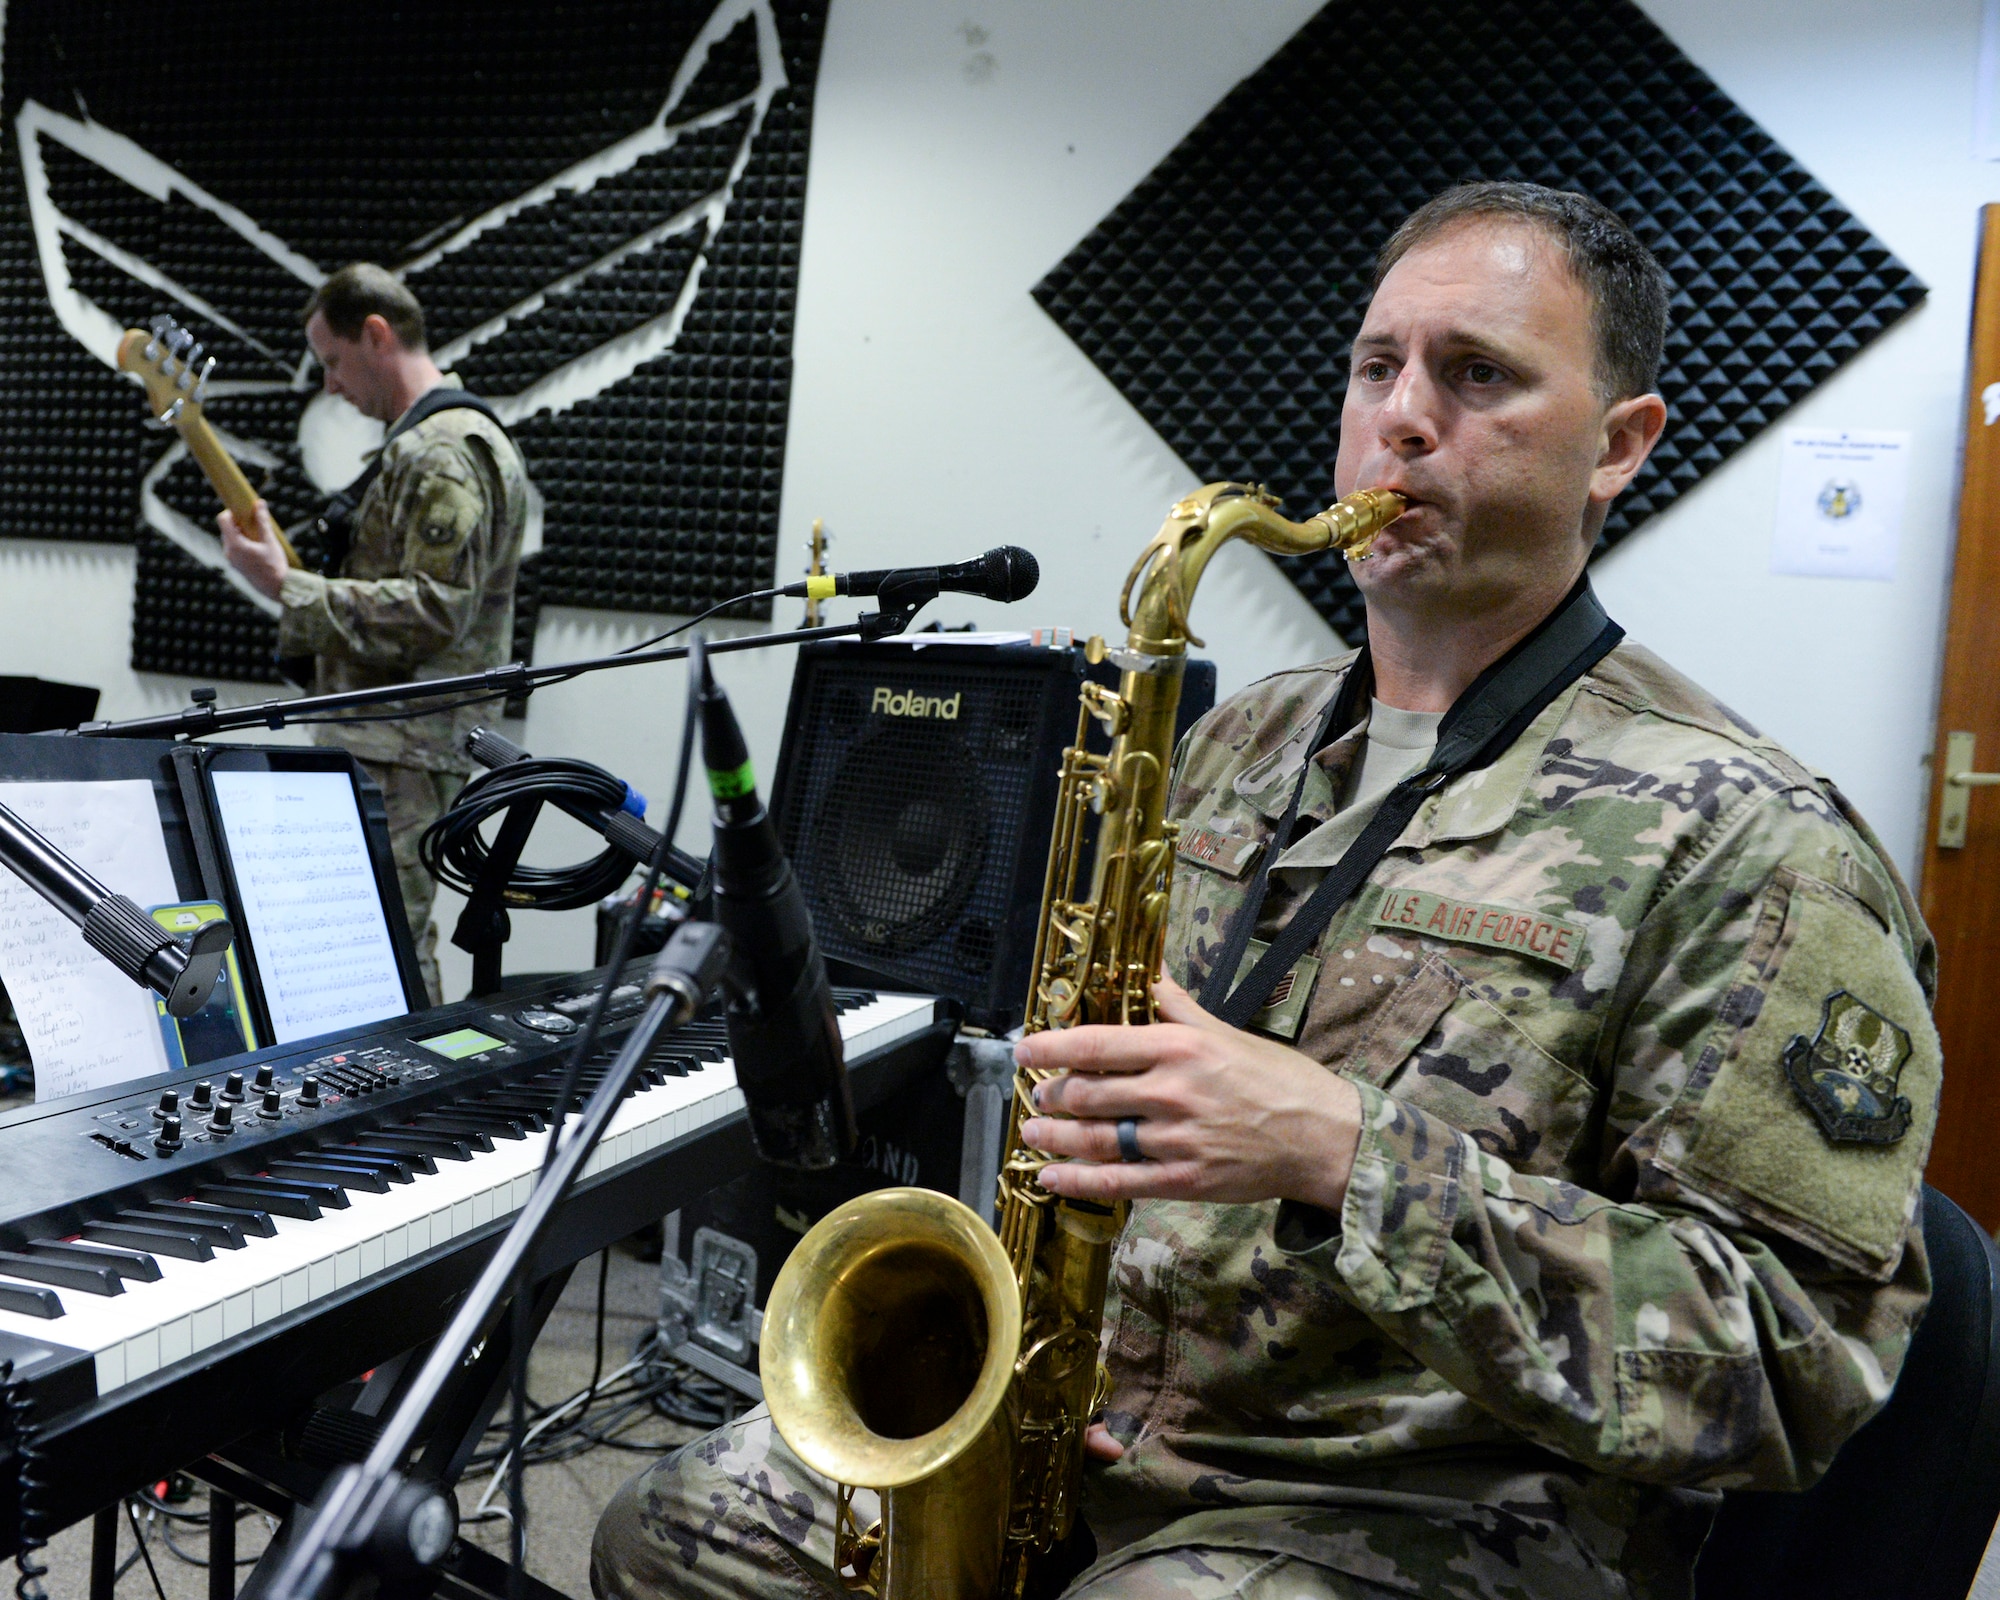 U.S. Air Force Tech. Sgt. Ryan Janus, keyboard player and saxophonist assigned to the Air Force Central Command Band, practices saxophone in preparation for a concert at Al Udeid, Air Force Base, Qatar, May 25, 2017. The AFCENT Band, stationed at Al Udeid, travels throughout the Central Command Area of Responsibility in support of building partnerships, boosting morale, and providing diplomacy and outreach to host nation communities. (U.S. Air Force photo by Tech. Sgt. Bradly A. Schneider/Released)